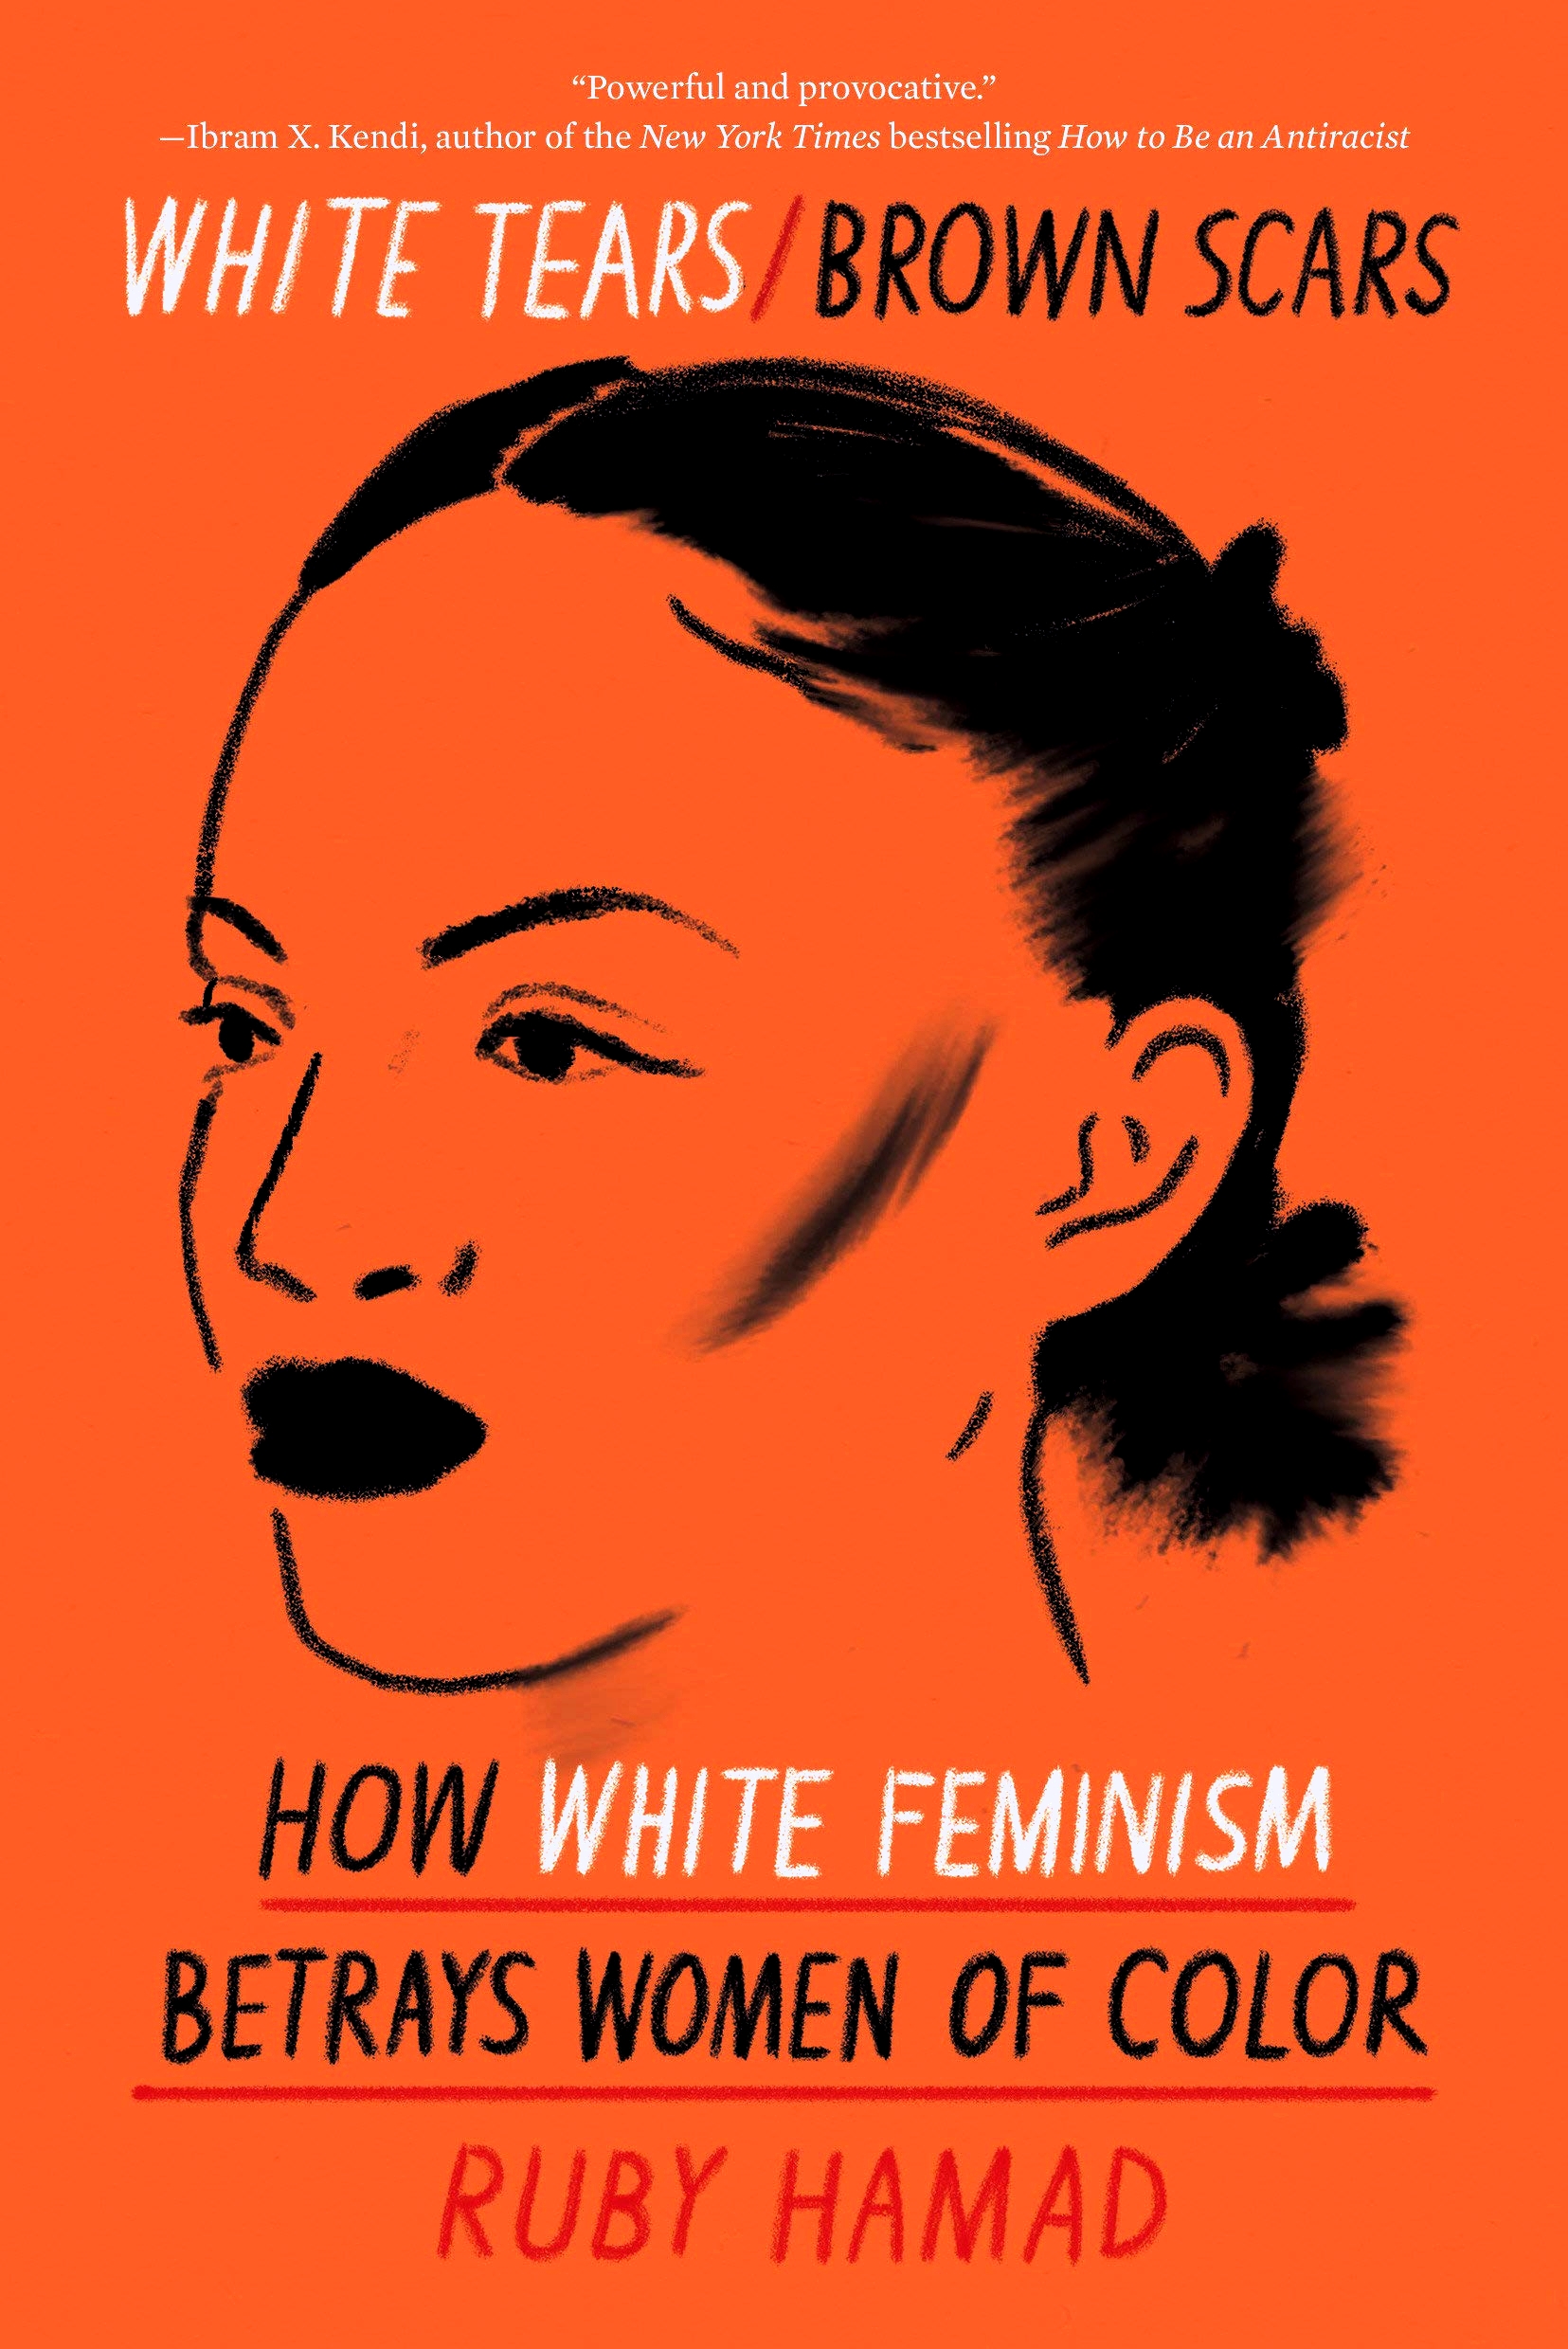 [EPUB] White Tears/Brown Scars: How White Feminism Betrays Women of Color by Ruby Hamad